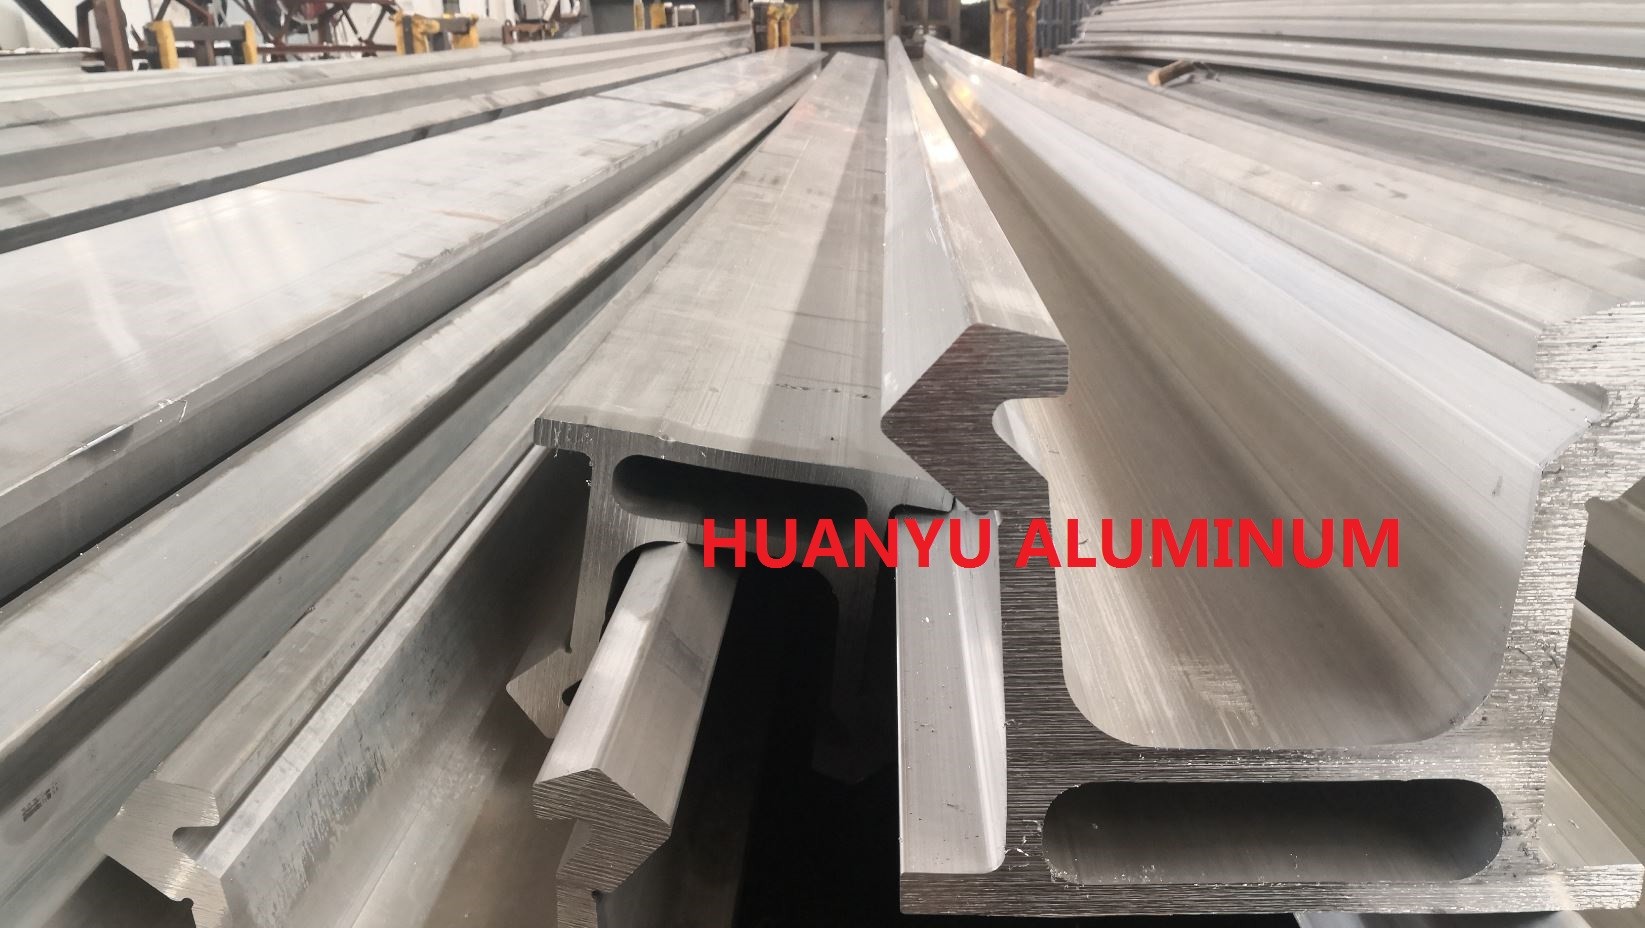 Hydraulic Feed Aluminium Extruded Profiles Torsional Resistance